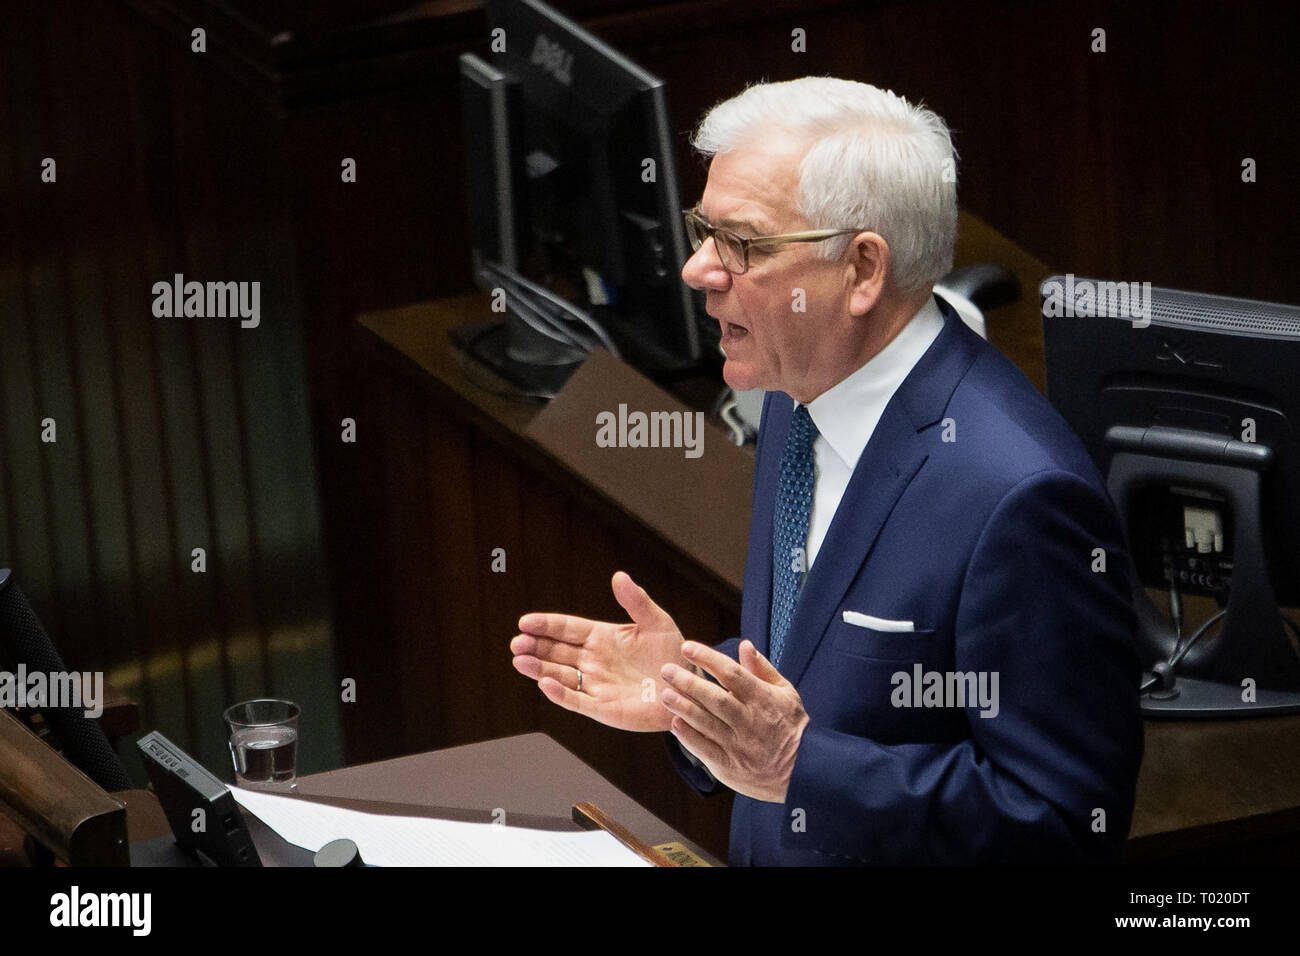 Polish Minister of Foreign Affairs Jacek Czaputowicz during his annual sttement at Sejm (lower house of the Polish parliament) in Warsaw, Poland on 14 March 2019 Stock Photo